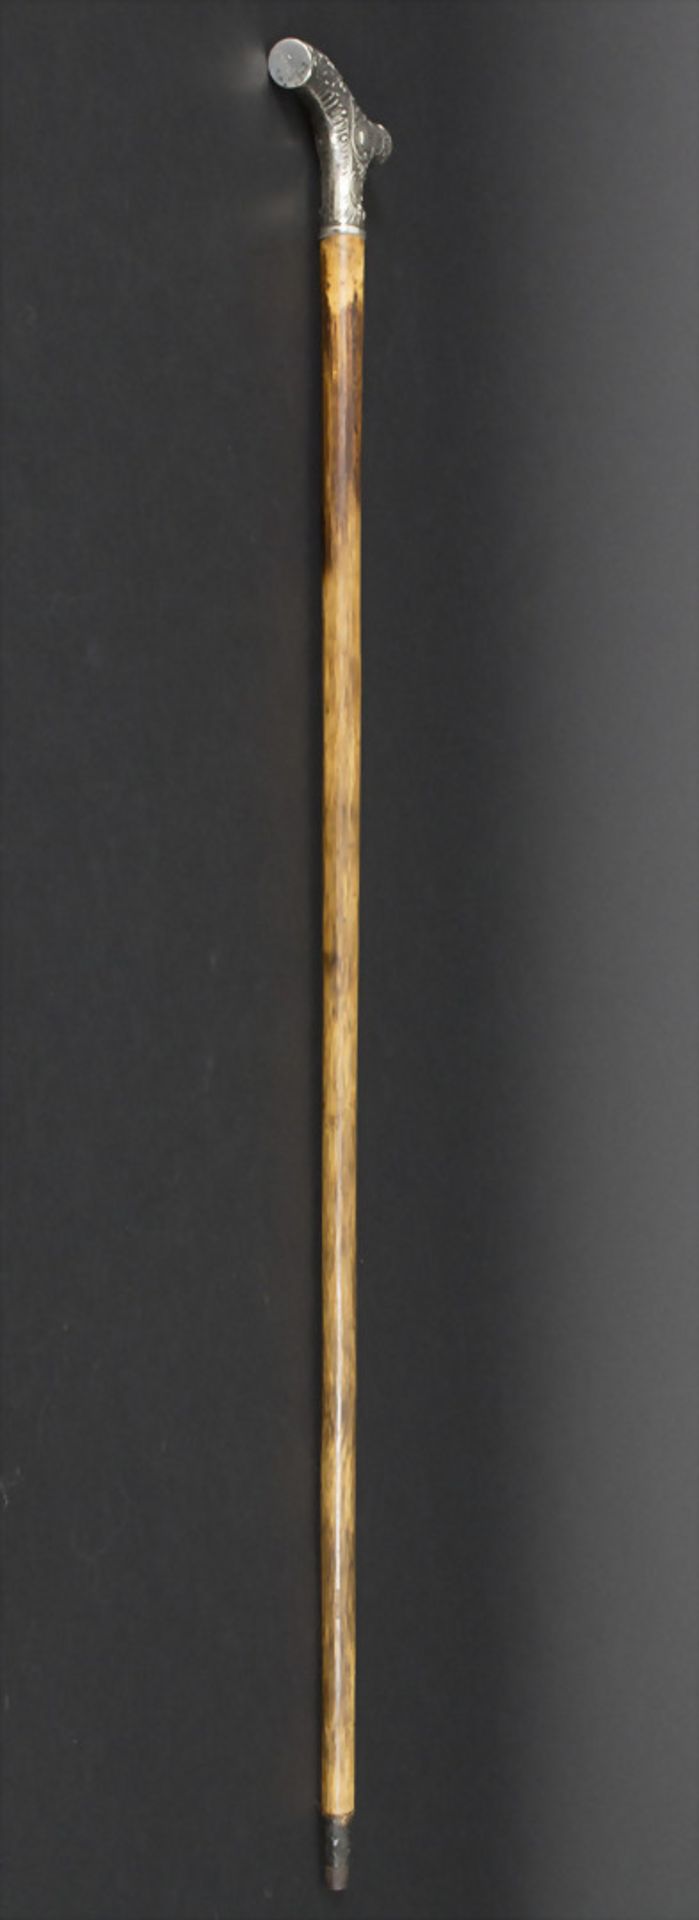 Gehstock mit Silbergriff 'Rocaille' / A silver handle 'Rocaille', Ende 19. Jh.Material: Silber, - Image 5 of 5